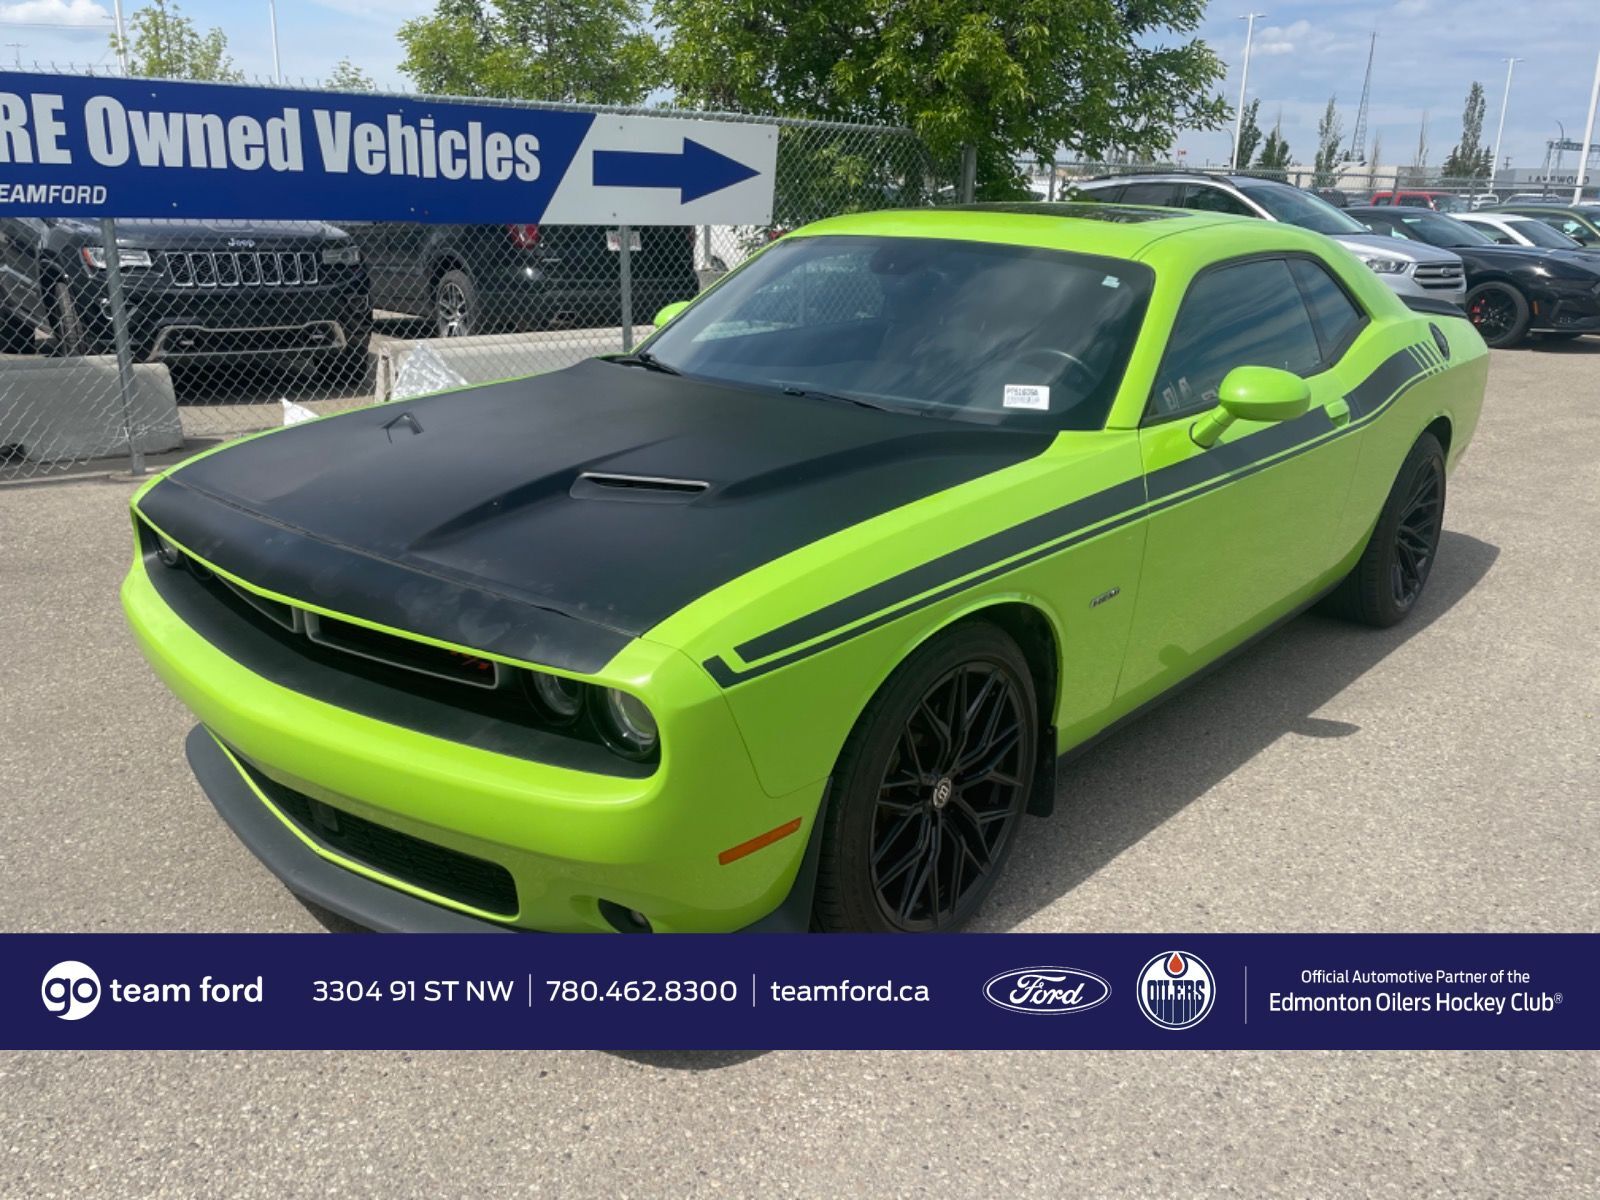 2015 Dodge Challenger 5.7L HEMI, LEATHER, RT. 8.4 TOUCH SCREEN, HEATED S